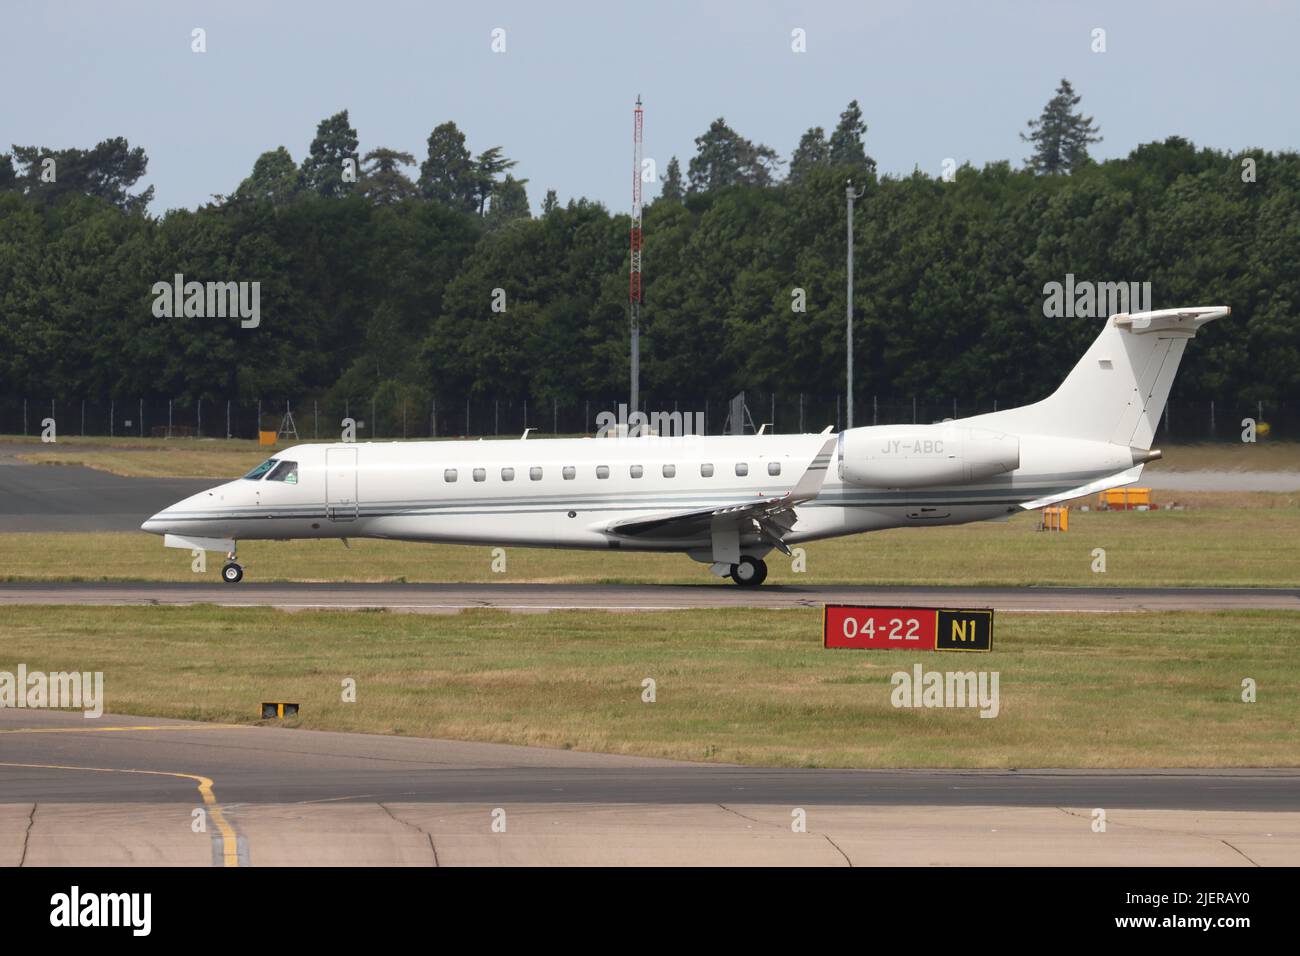 JY-ABC, Embraer Legacy 600, landing at Stansted Airport, Essex, UK Stock Photo